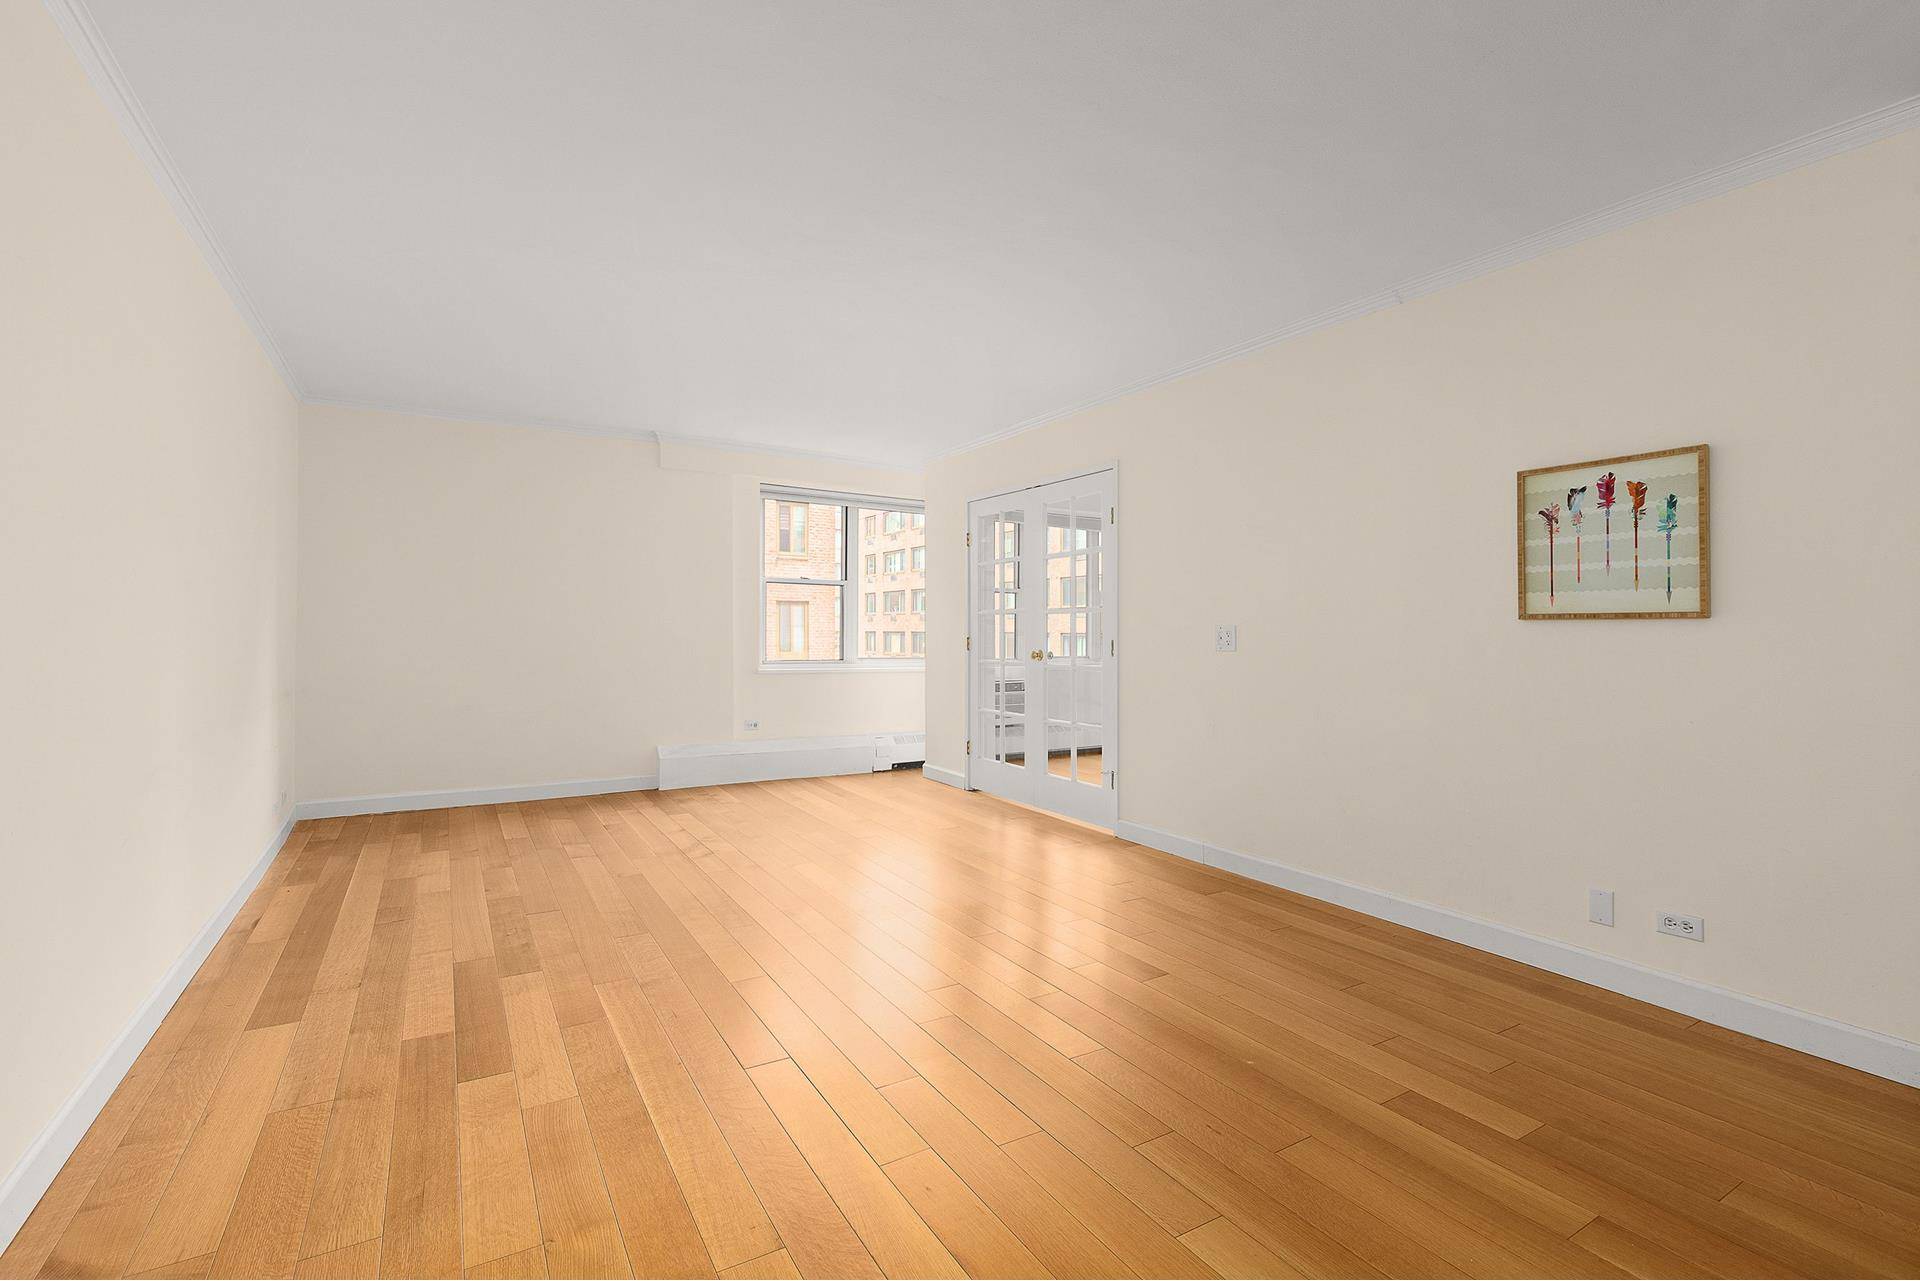 Oversized and converted 2 Bedroom 1 bath with large living room, renovated kitchen and West facing exposure.